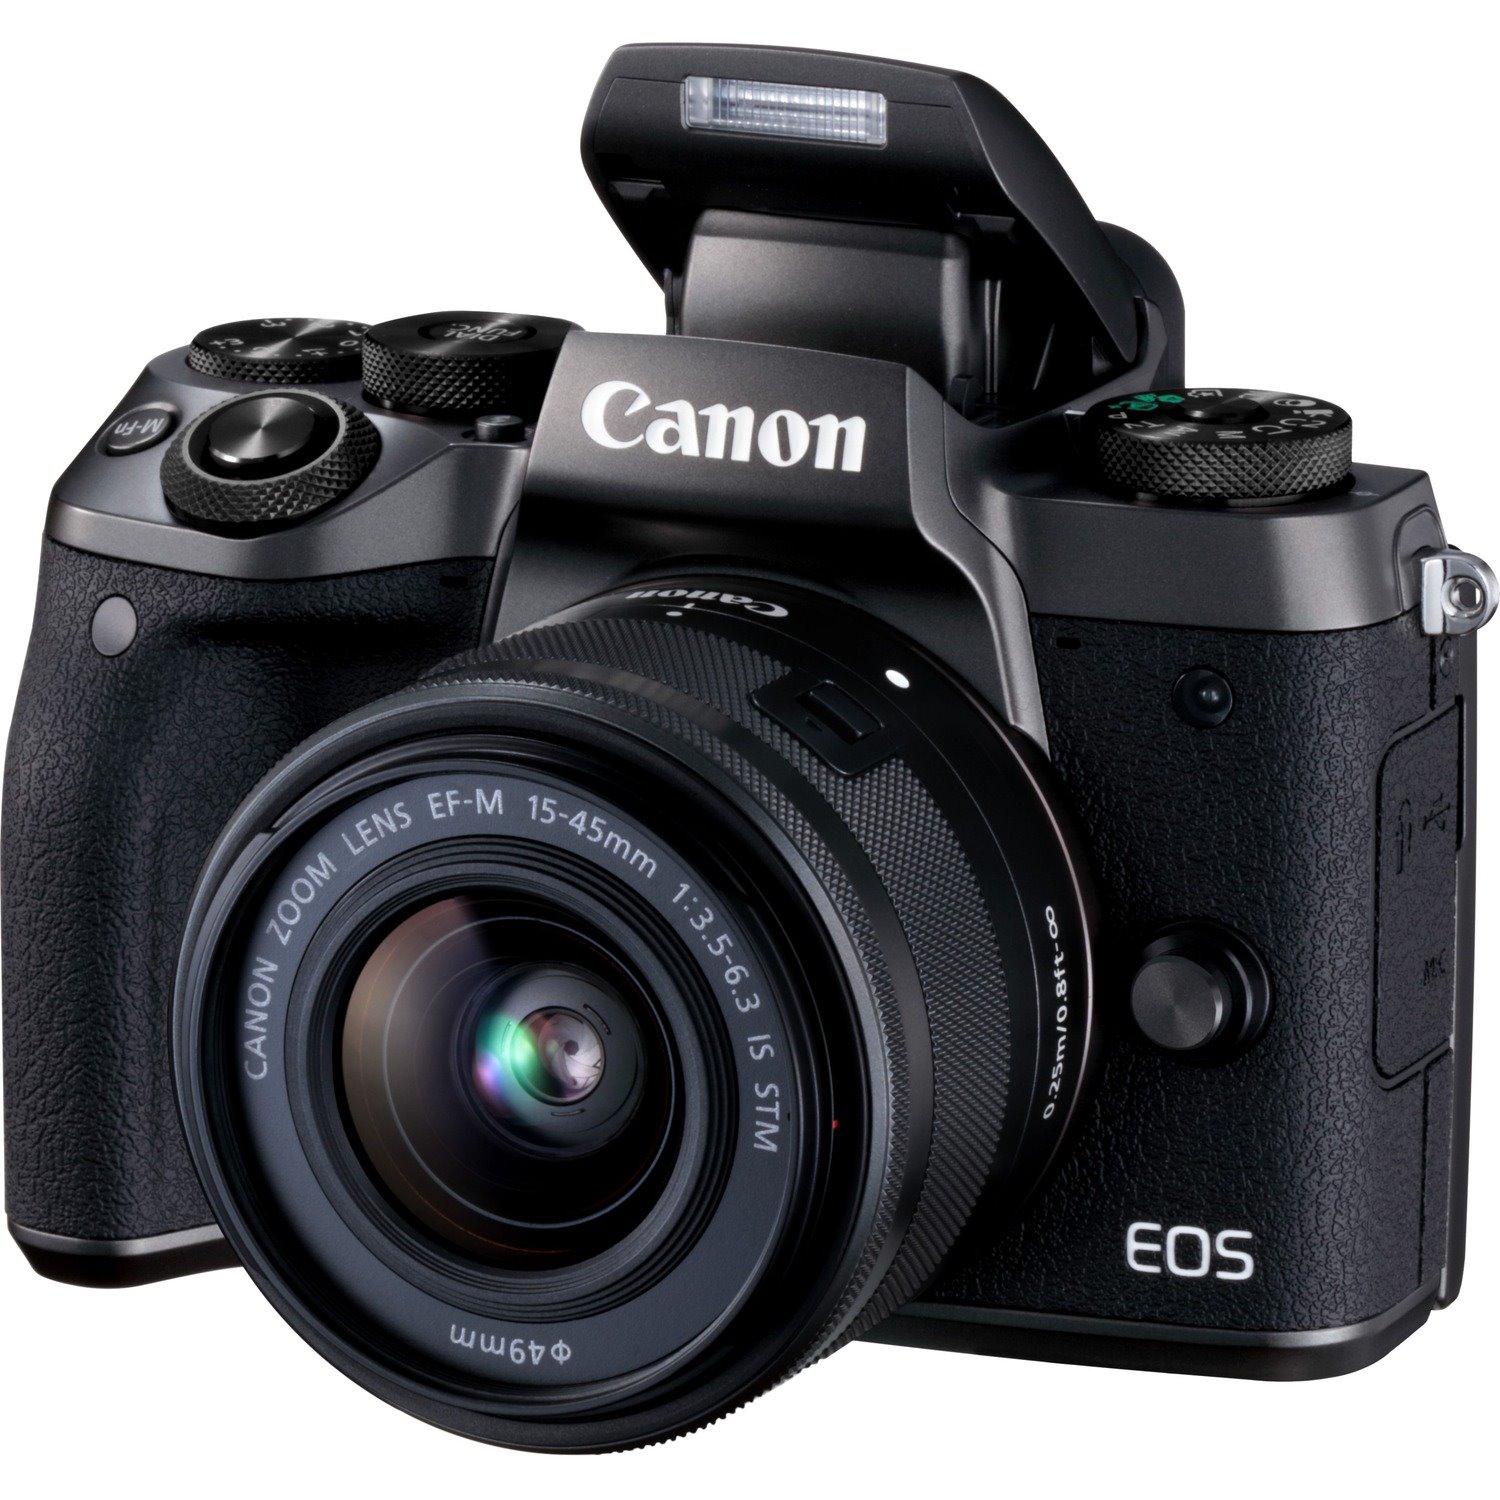 Canon EOS M5 24.2 Megapixel Mirrorless Camera with Lens - 15 mm - 45 mm